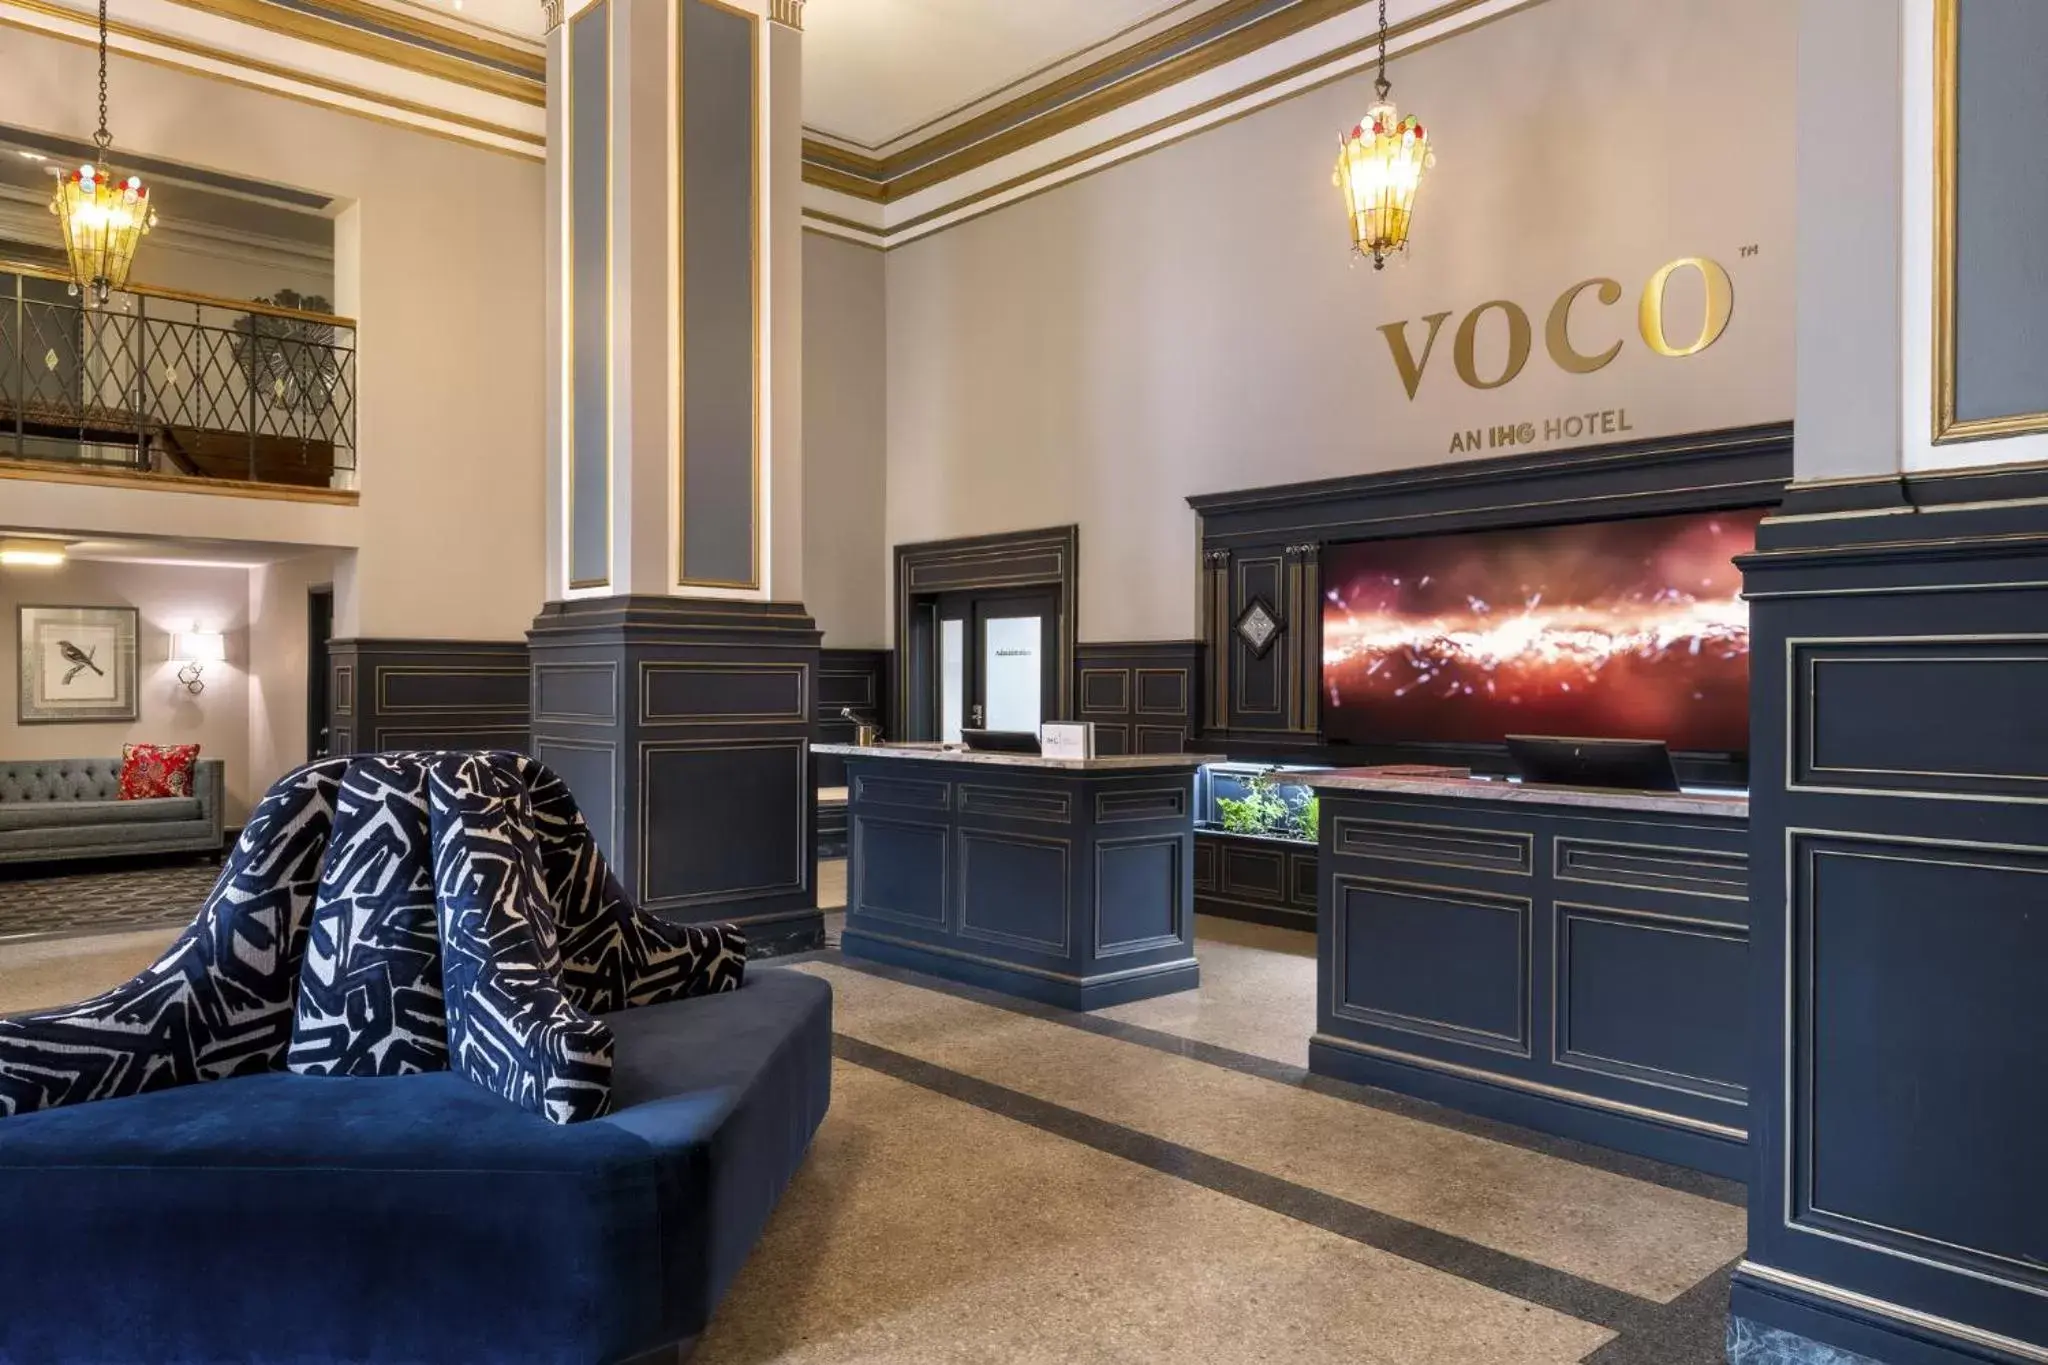 Property building, Lobby/Reception in voco The Tiger Hotel, Columbia, MO, an IHG Hotel